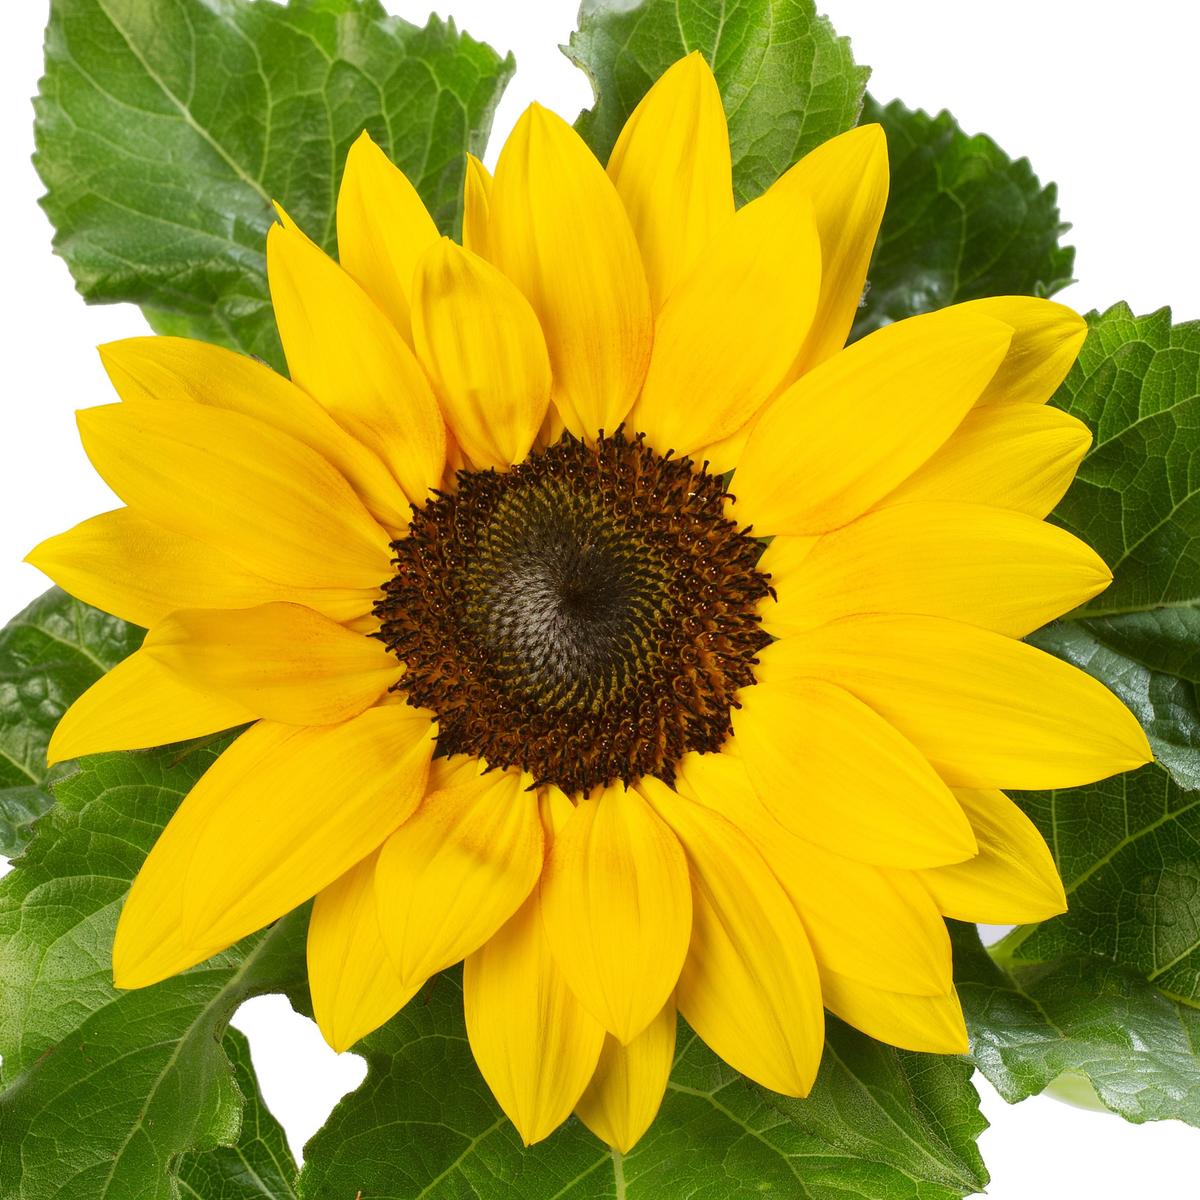 Sunsation<sup>®</sup> sunflower: Here comes the sun!